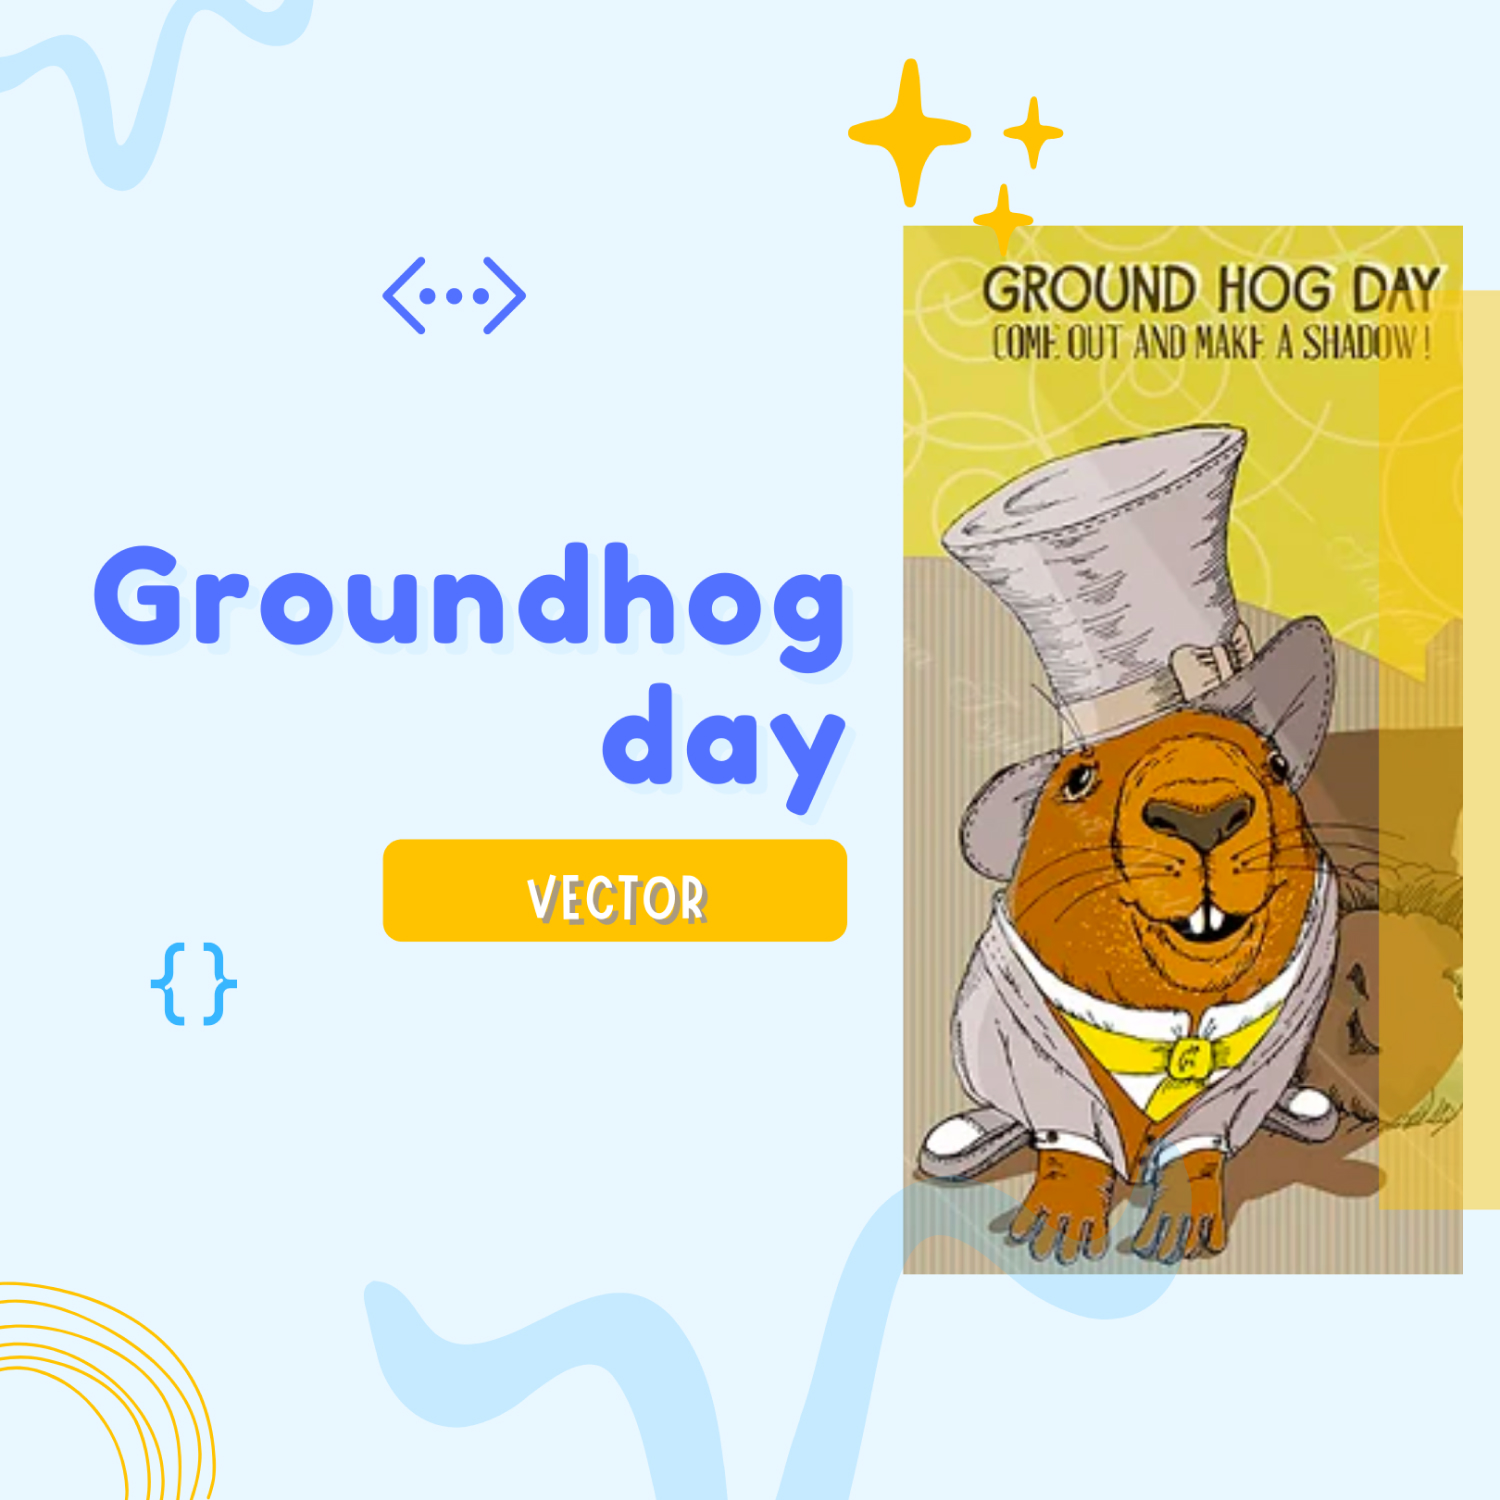 Preview images with groundhog day.